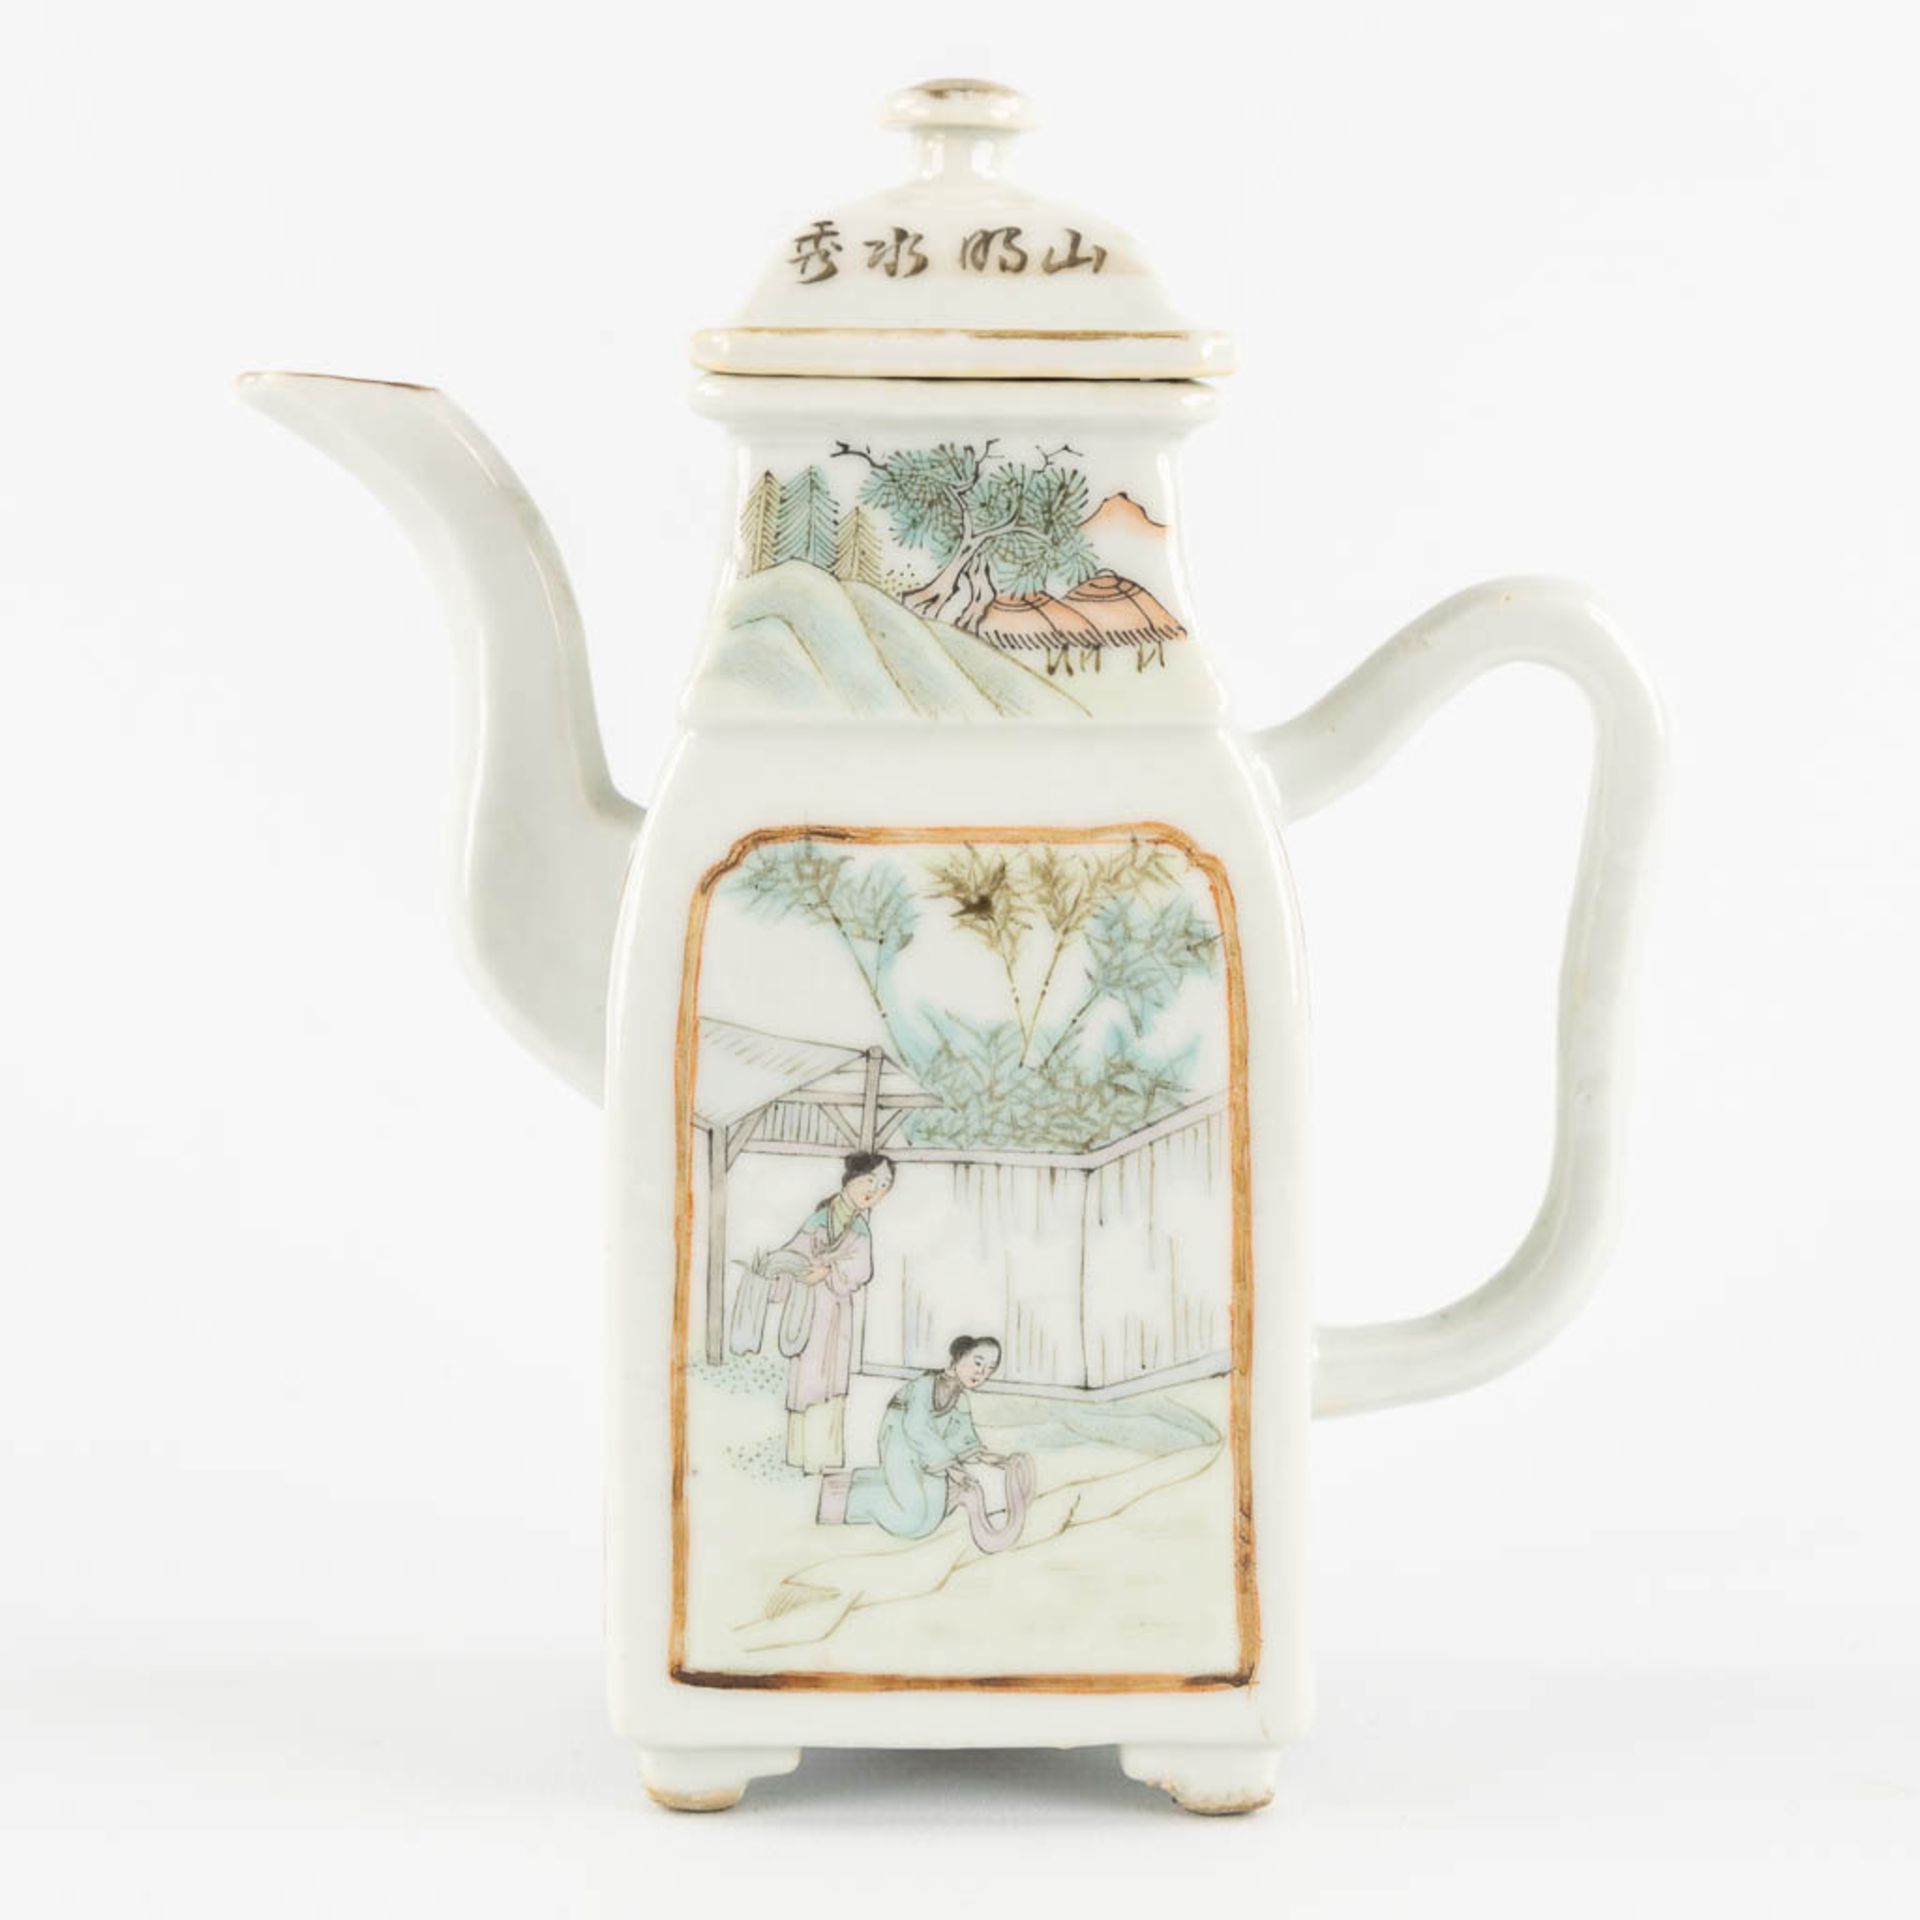 A Chinese pair of plates and a teapot. Decorated with Foo Lions and Figurines. (H:18 cm) - Bild 7 aus 15